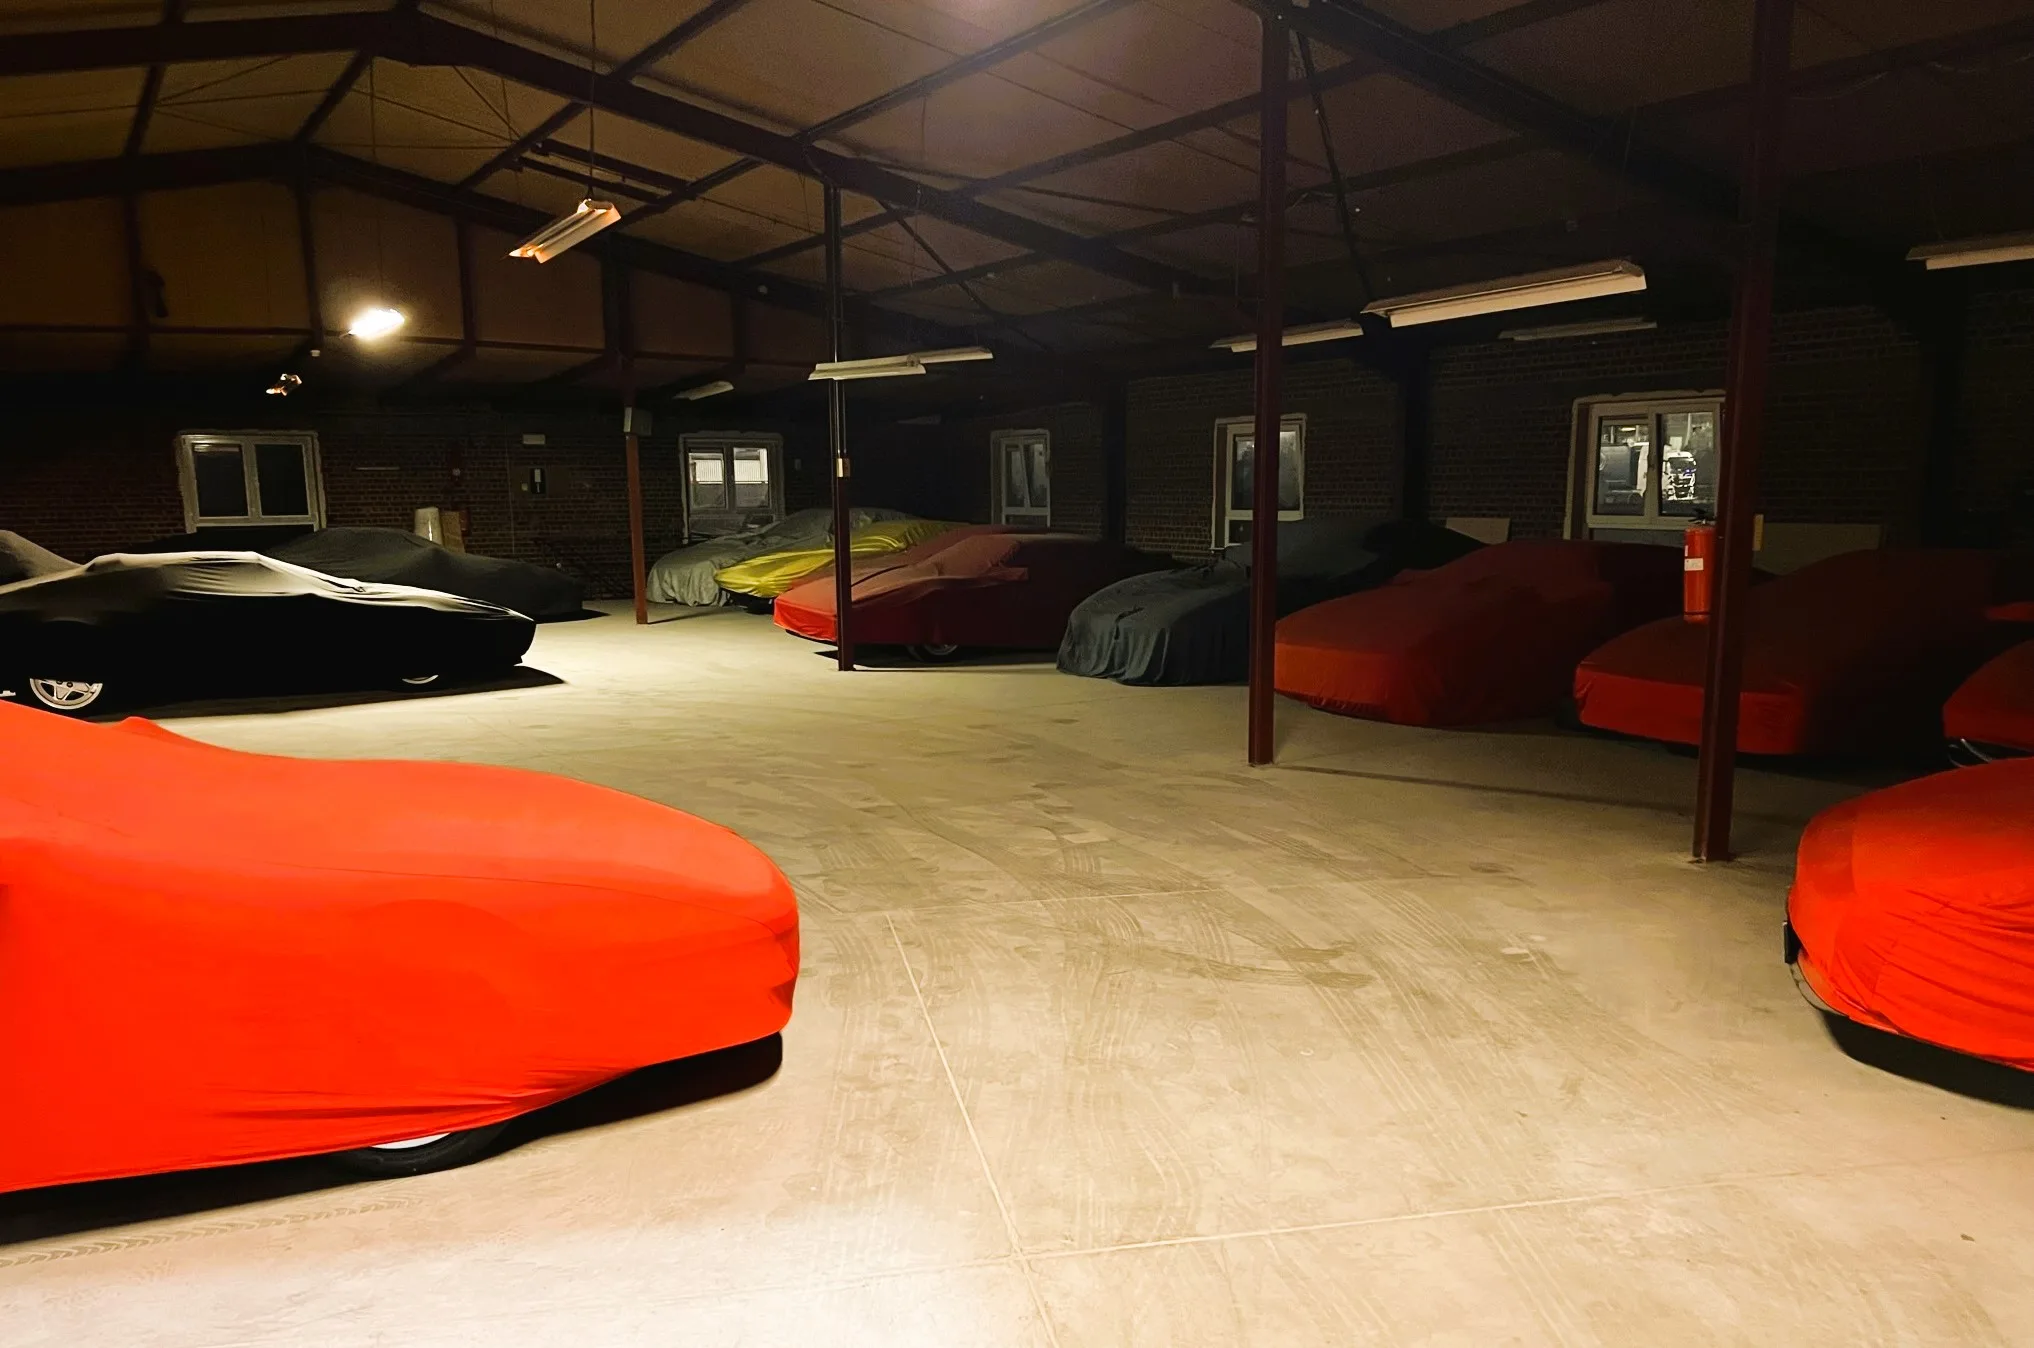 the abandoned luxury cars discovered in warehouse which were found in central Brussels.